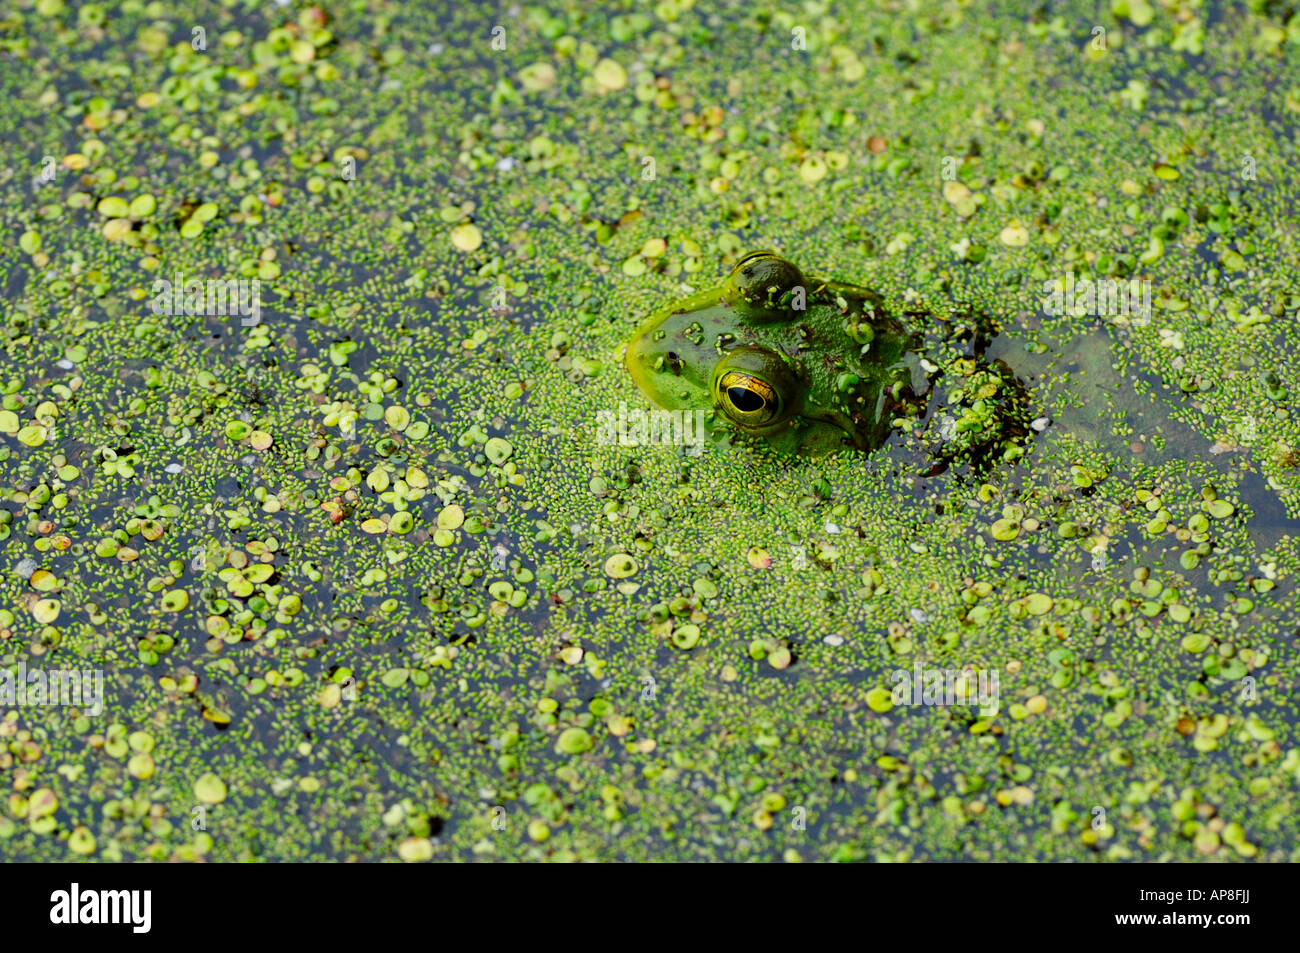 Green frog in pond with duck weed Stock Photo